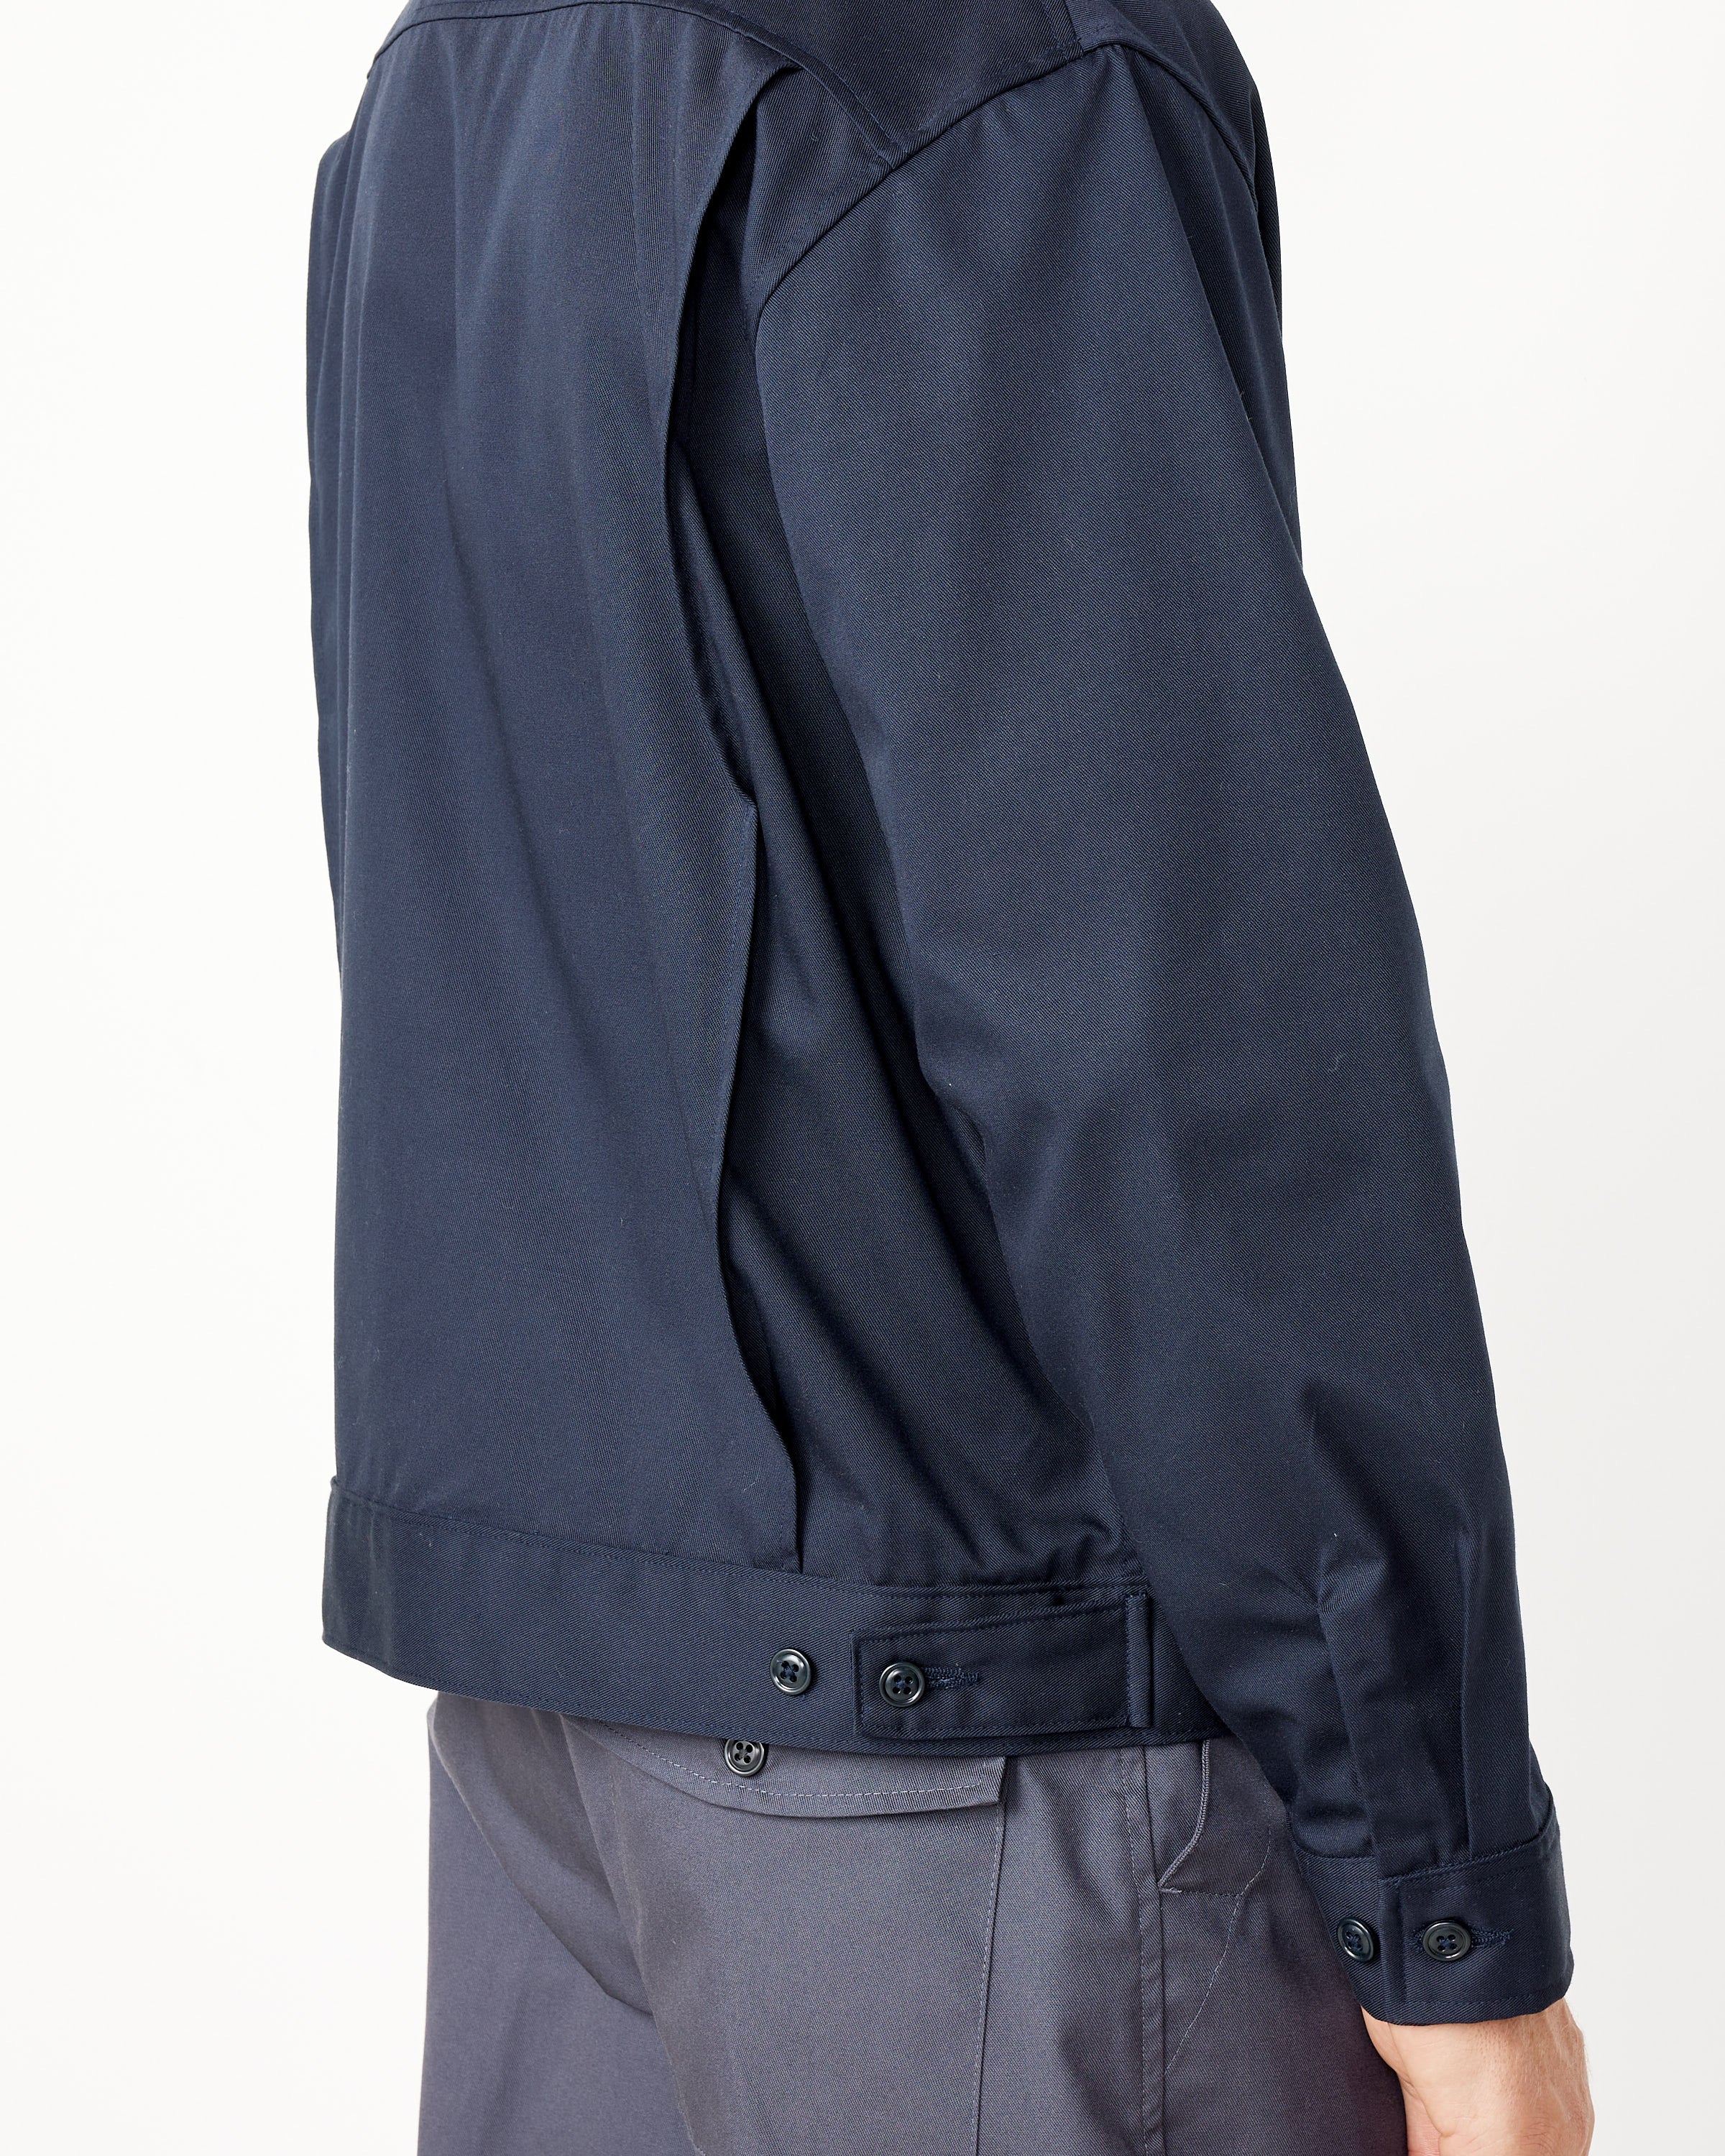 OCR Jacket ECO Twill in Navy – Mohawk General Store